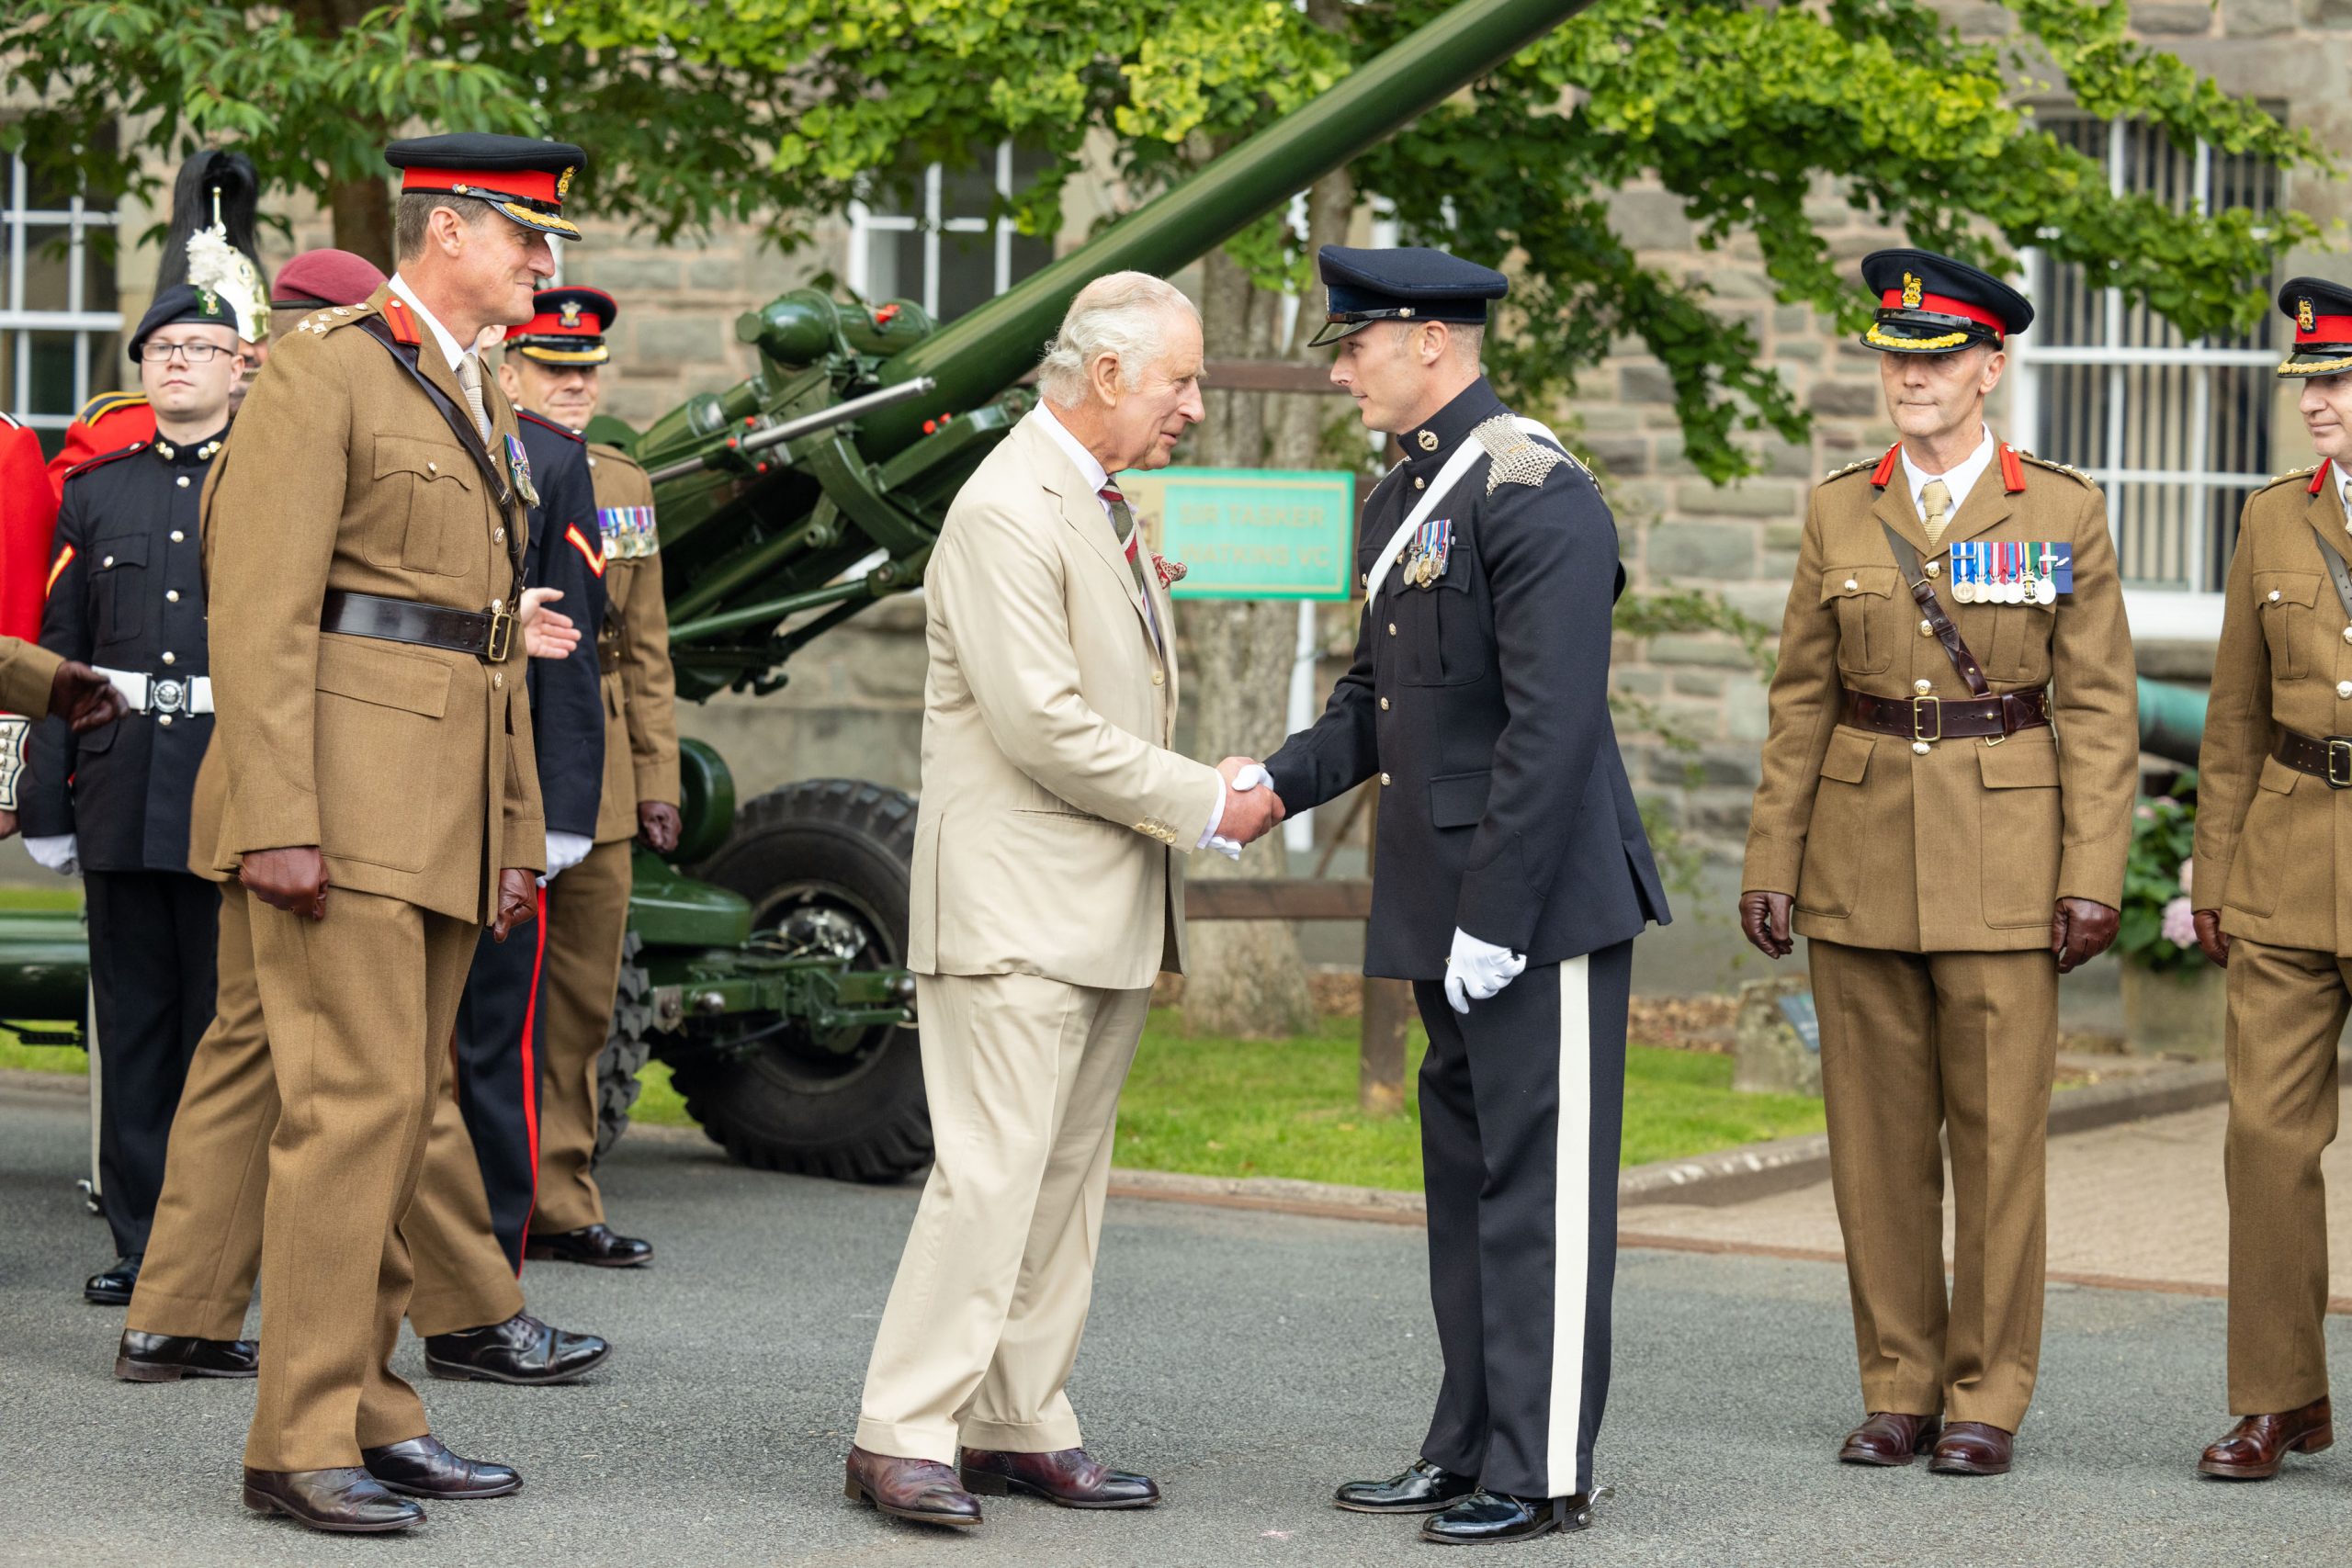 Head Of The Army In Wales Welcomes King Charles III To Brecon Barracks